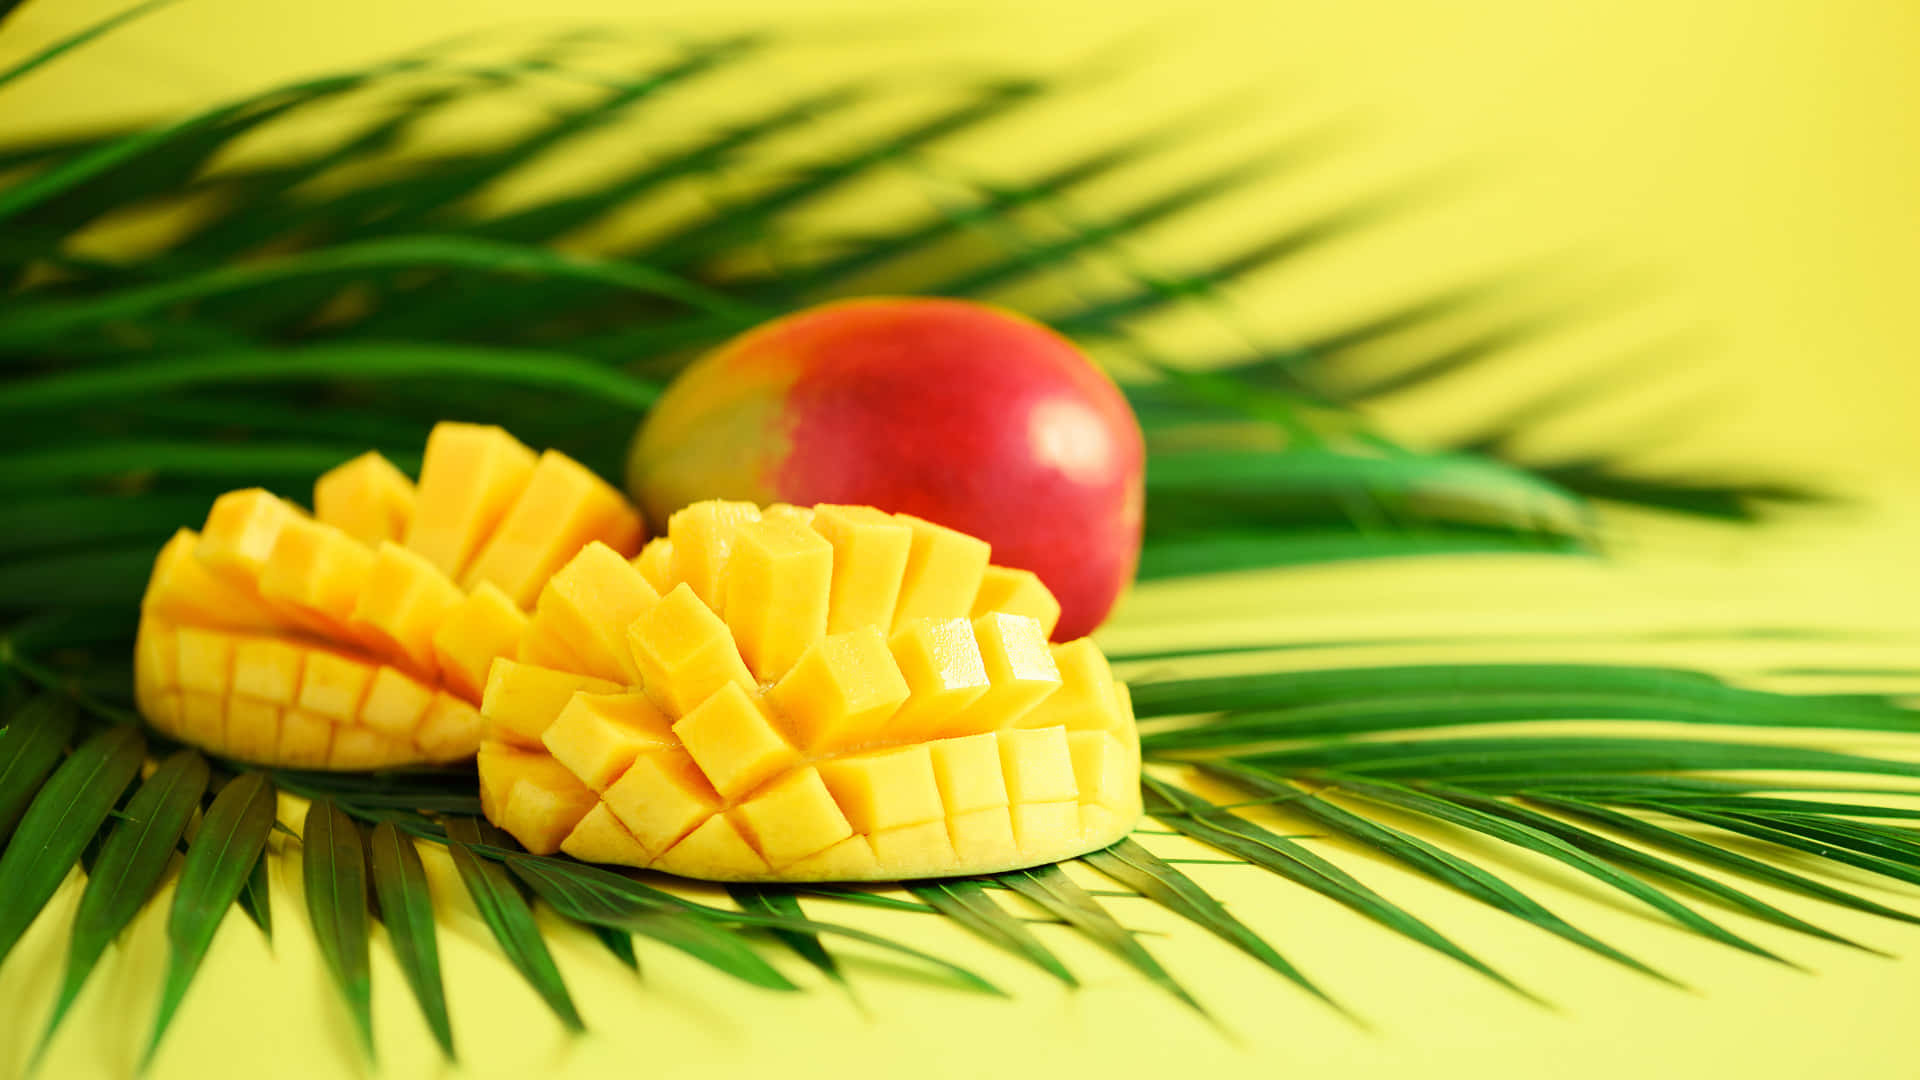 Mangoes And A Pineapple On A Yellow Background